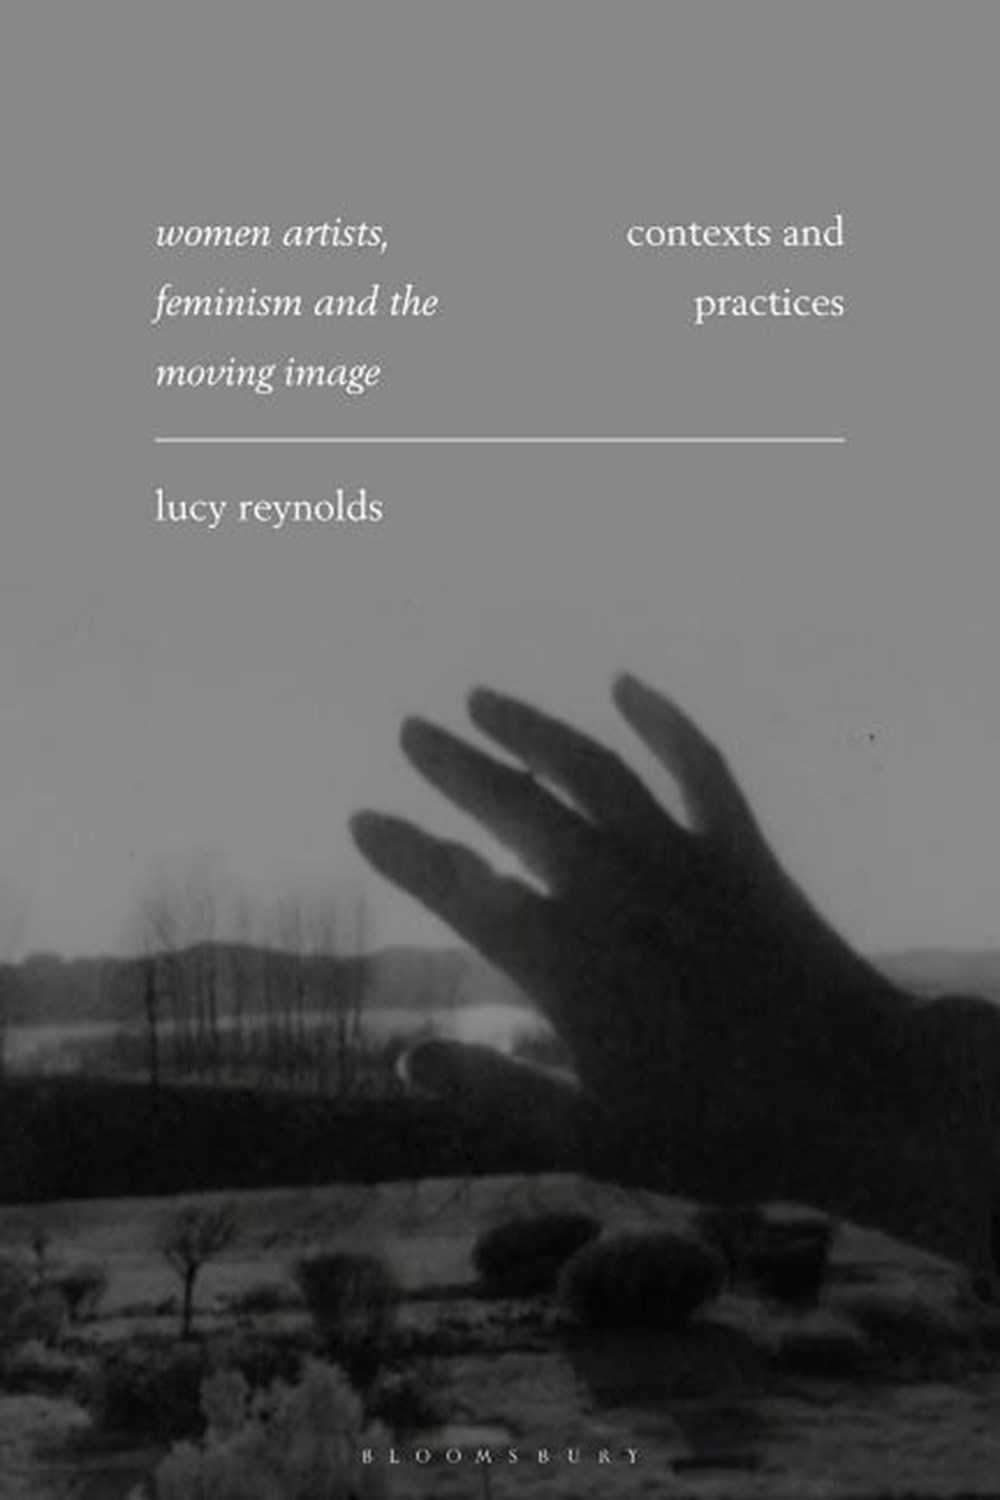 Women Artists, Feminism and the Moving Image: Contexts and Practices